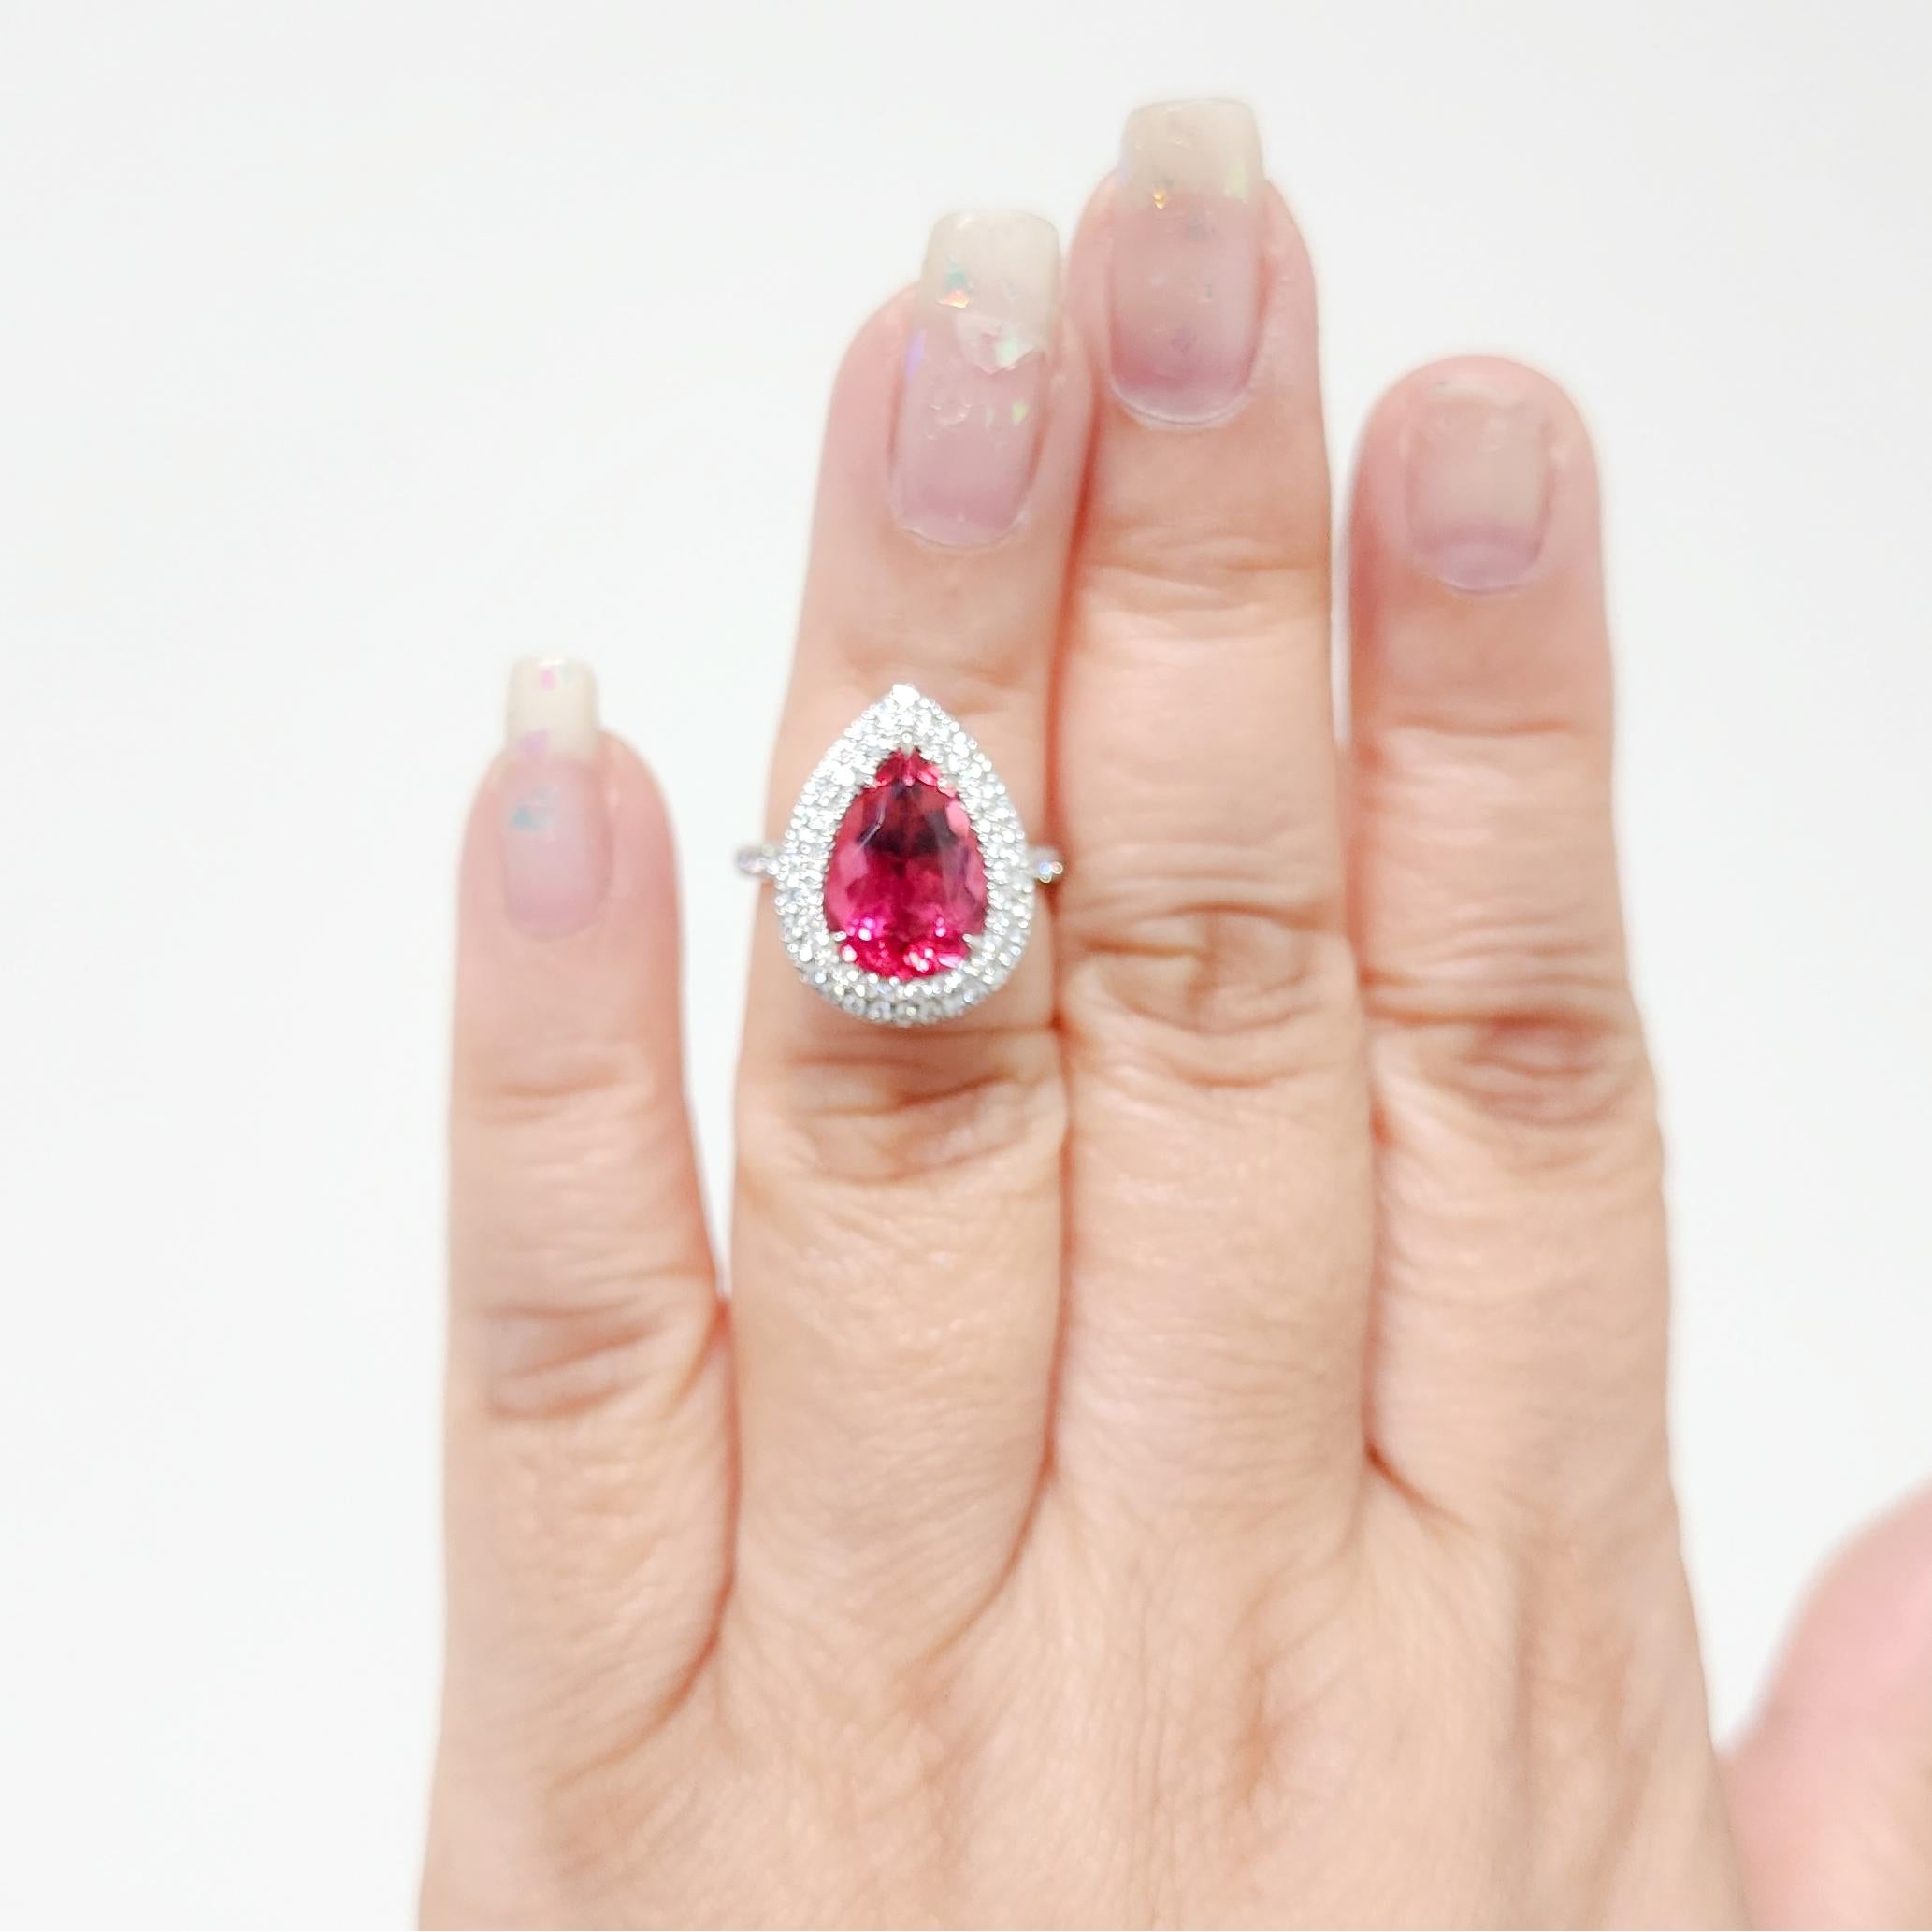 Gorgeous Tiffany & Company Soleste 4.70 ct. rubellite pear shape with 0.60 ct. good quality, white, and bright diamond rounds.  Handmade in platinum.  Ring size 6.